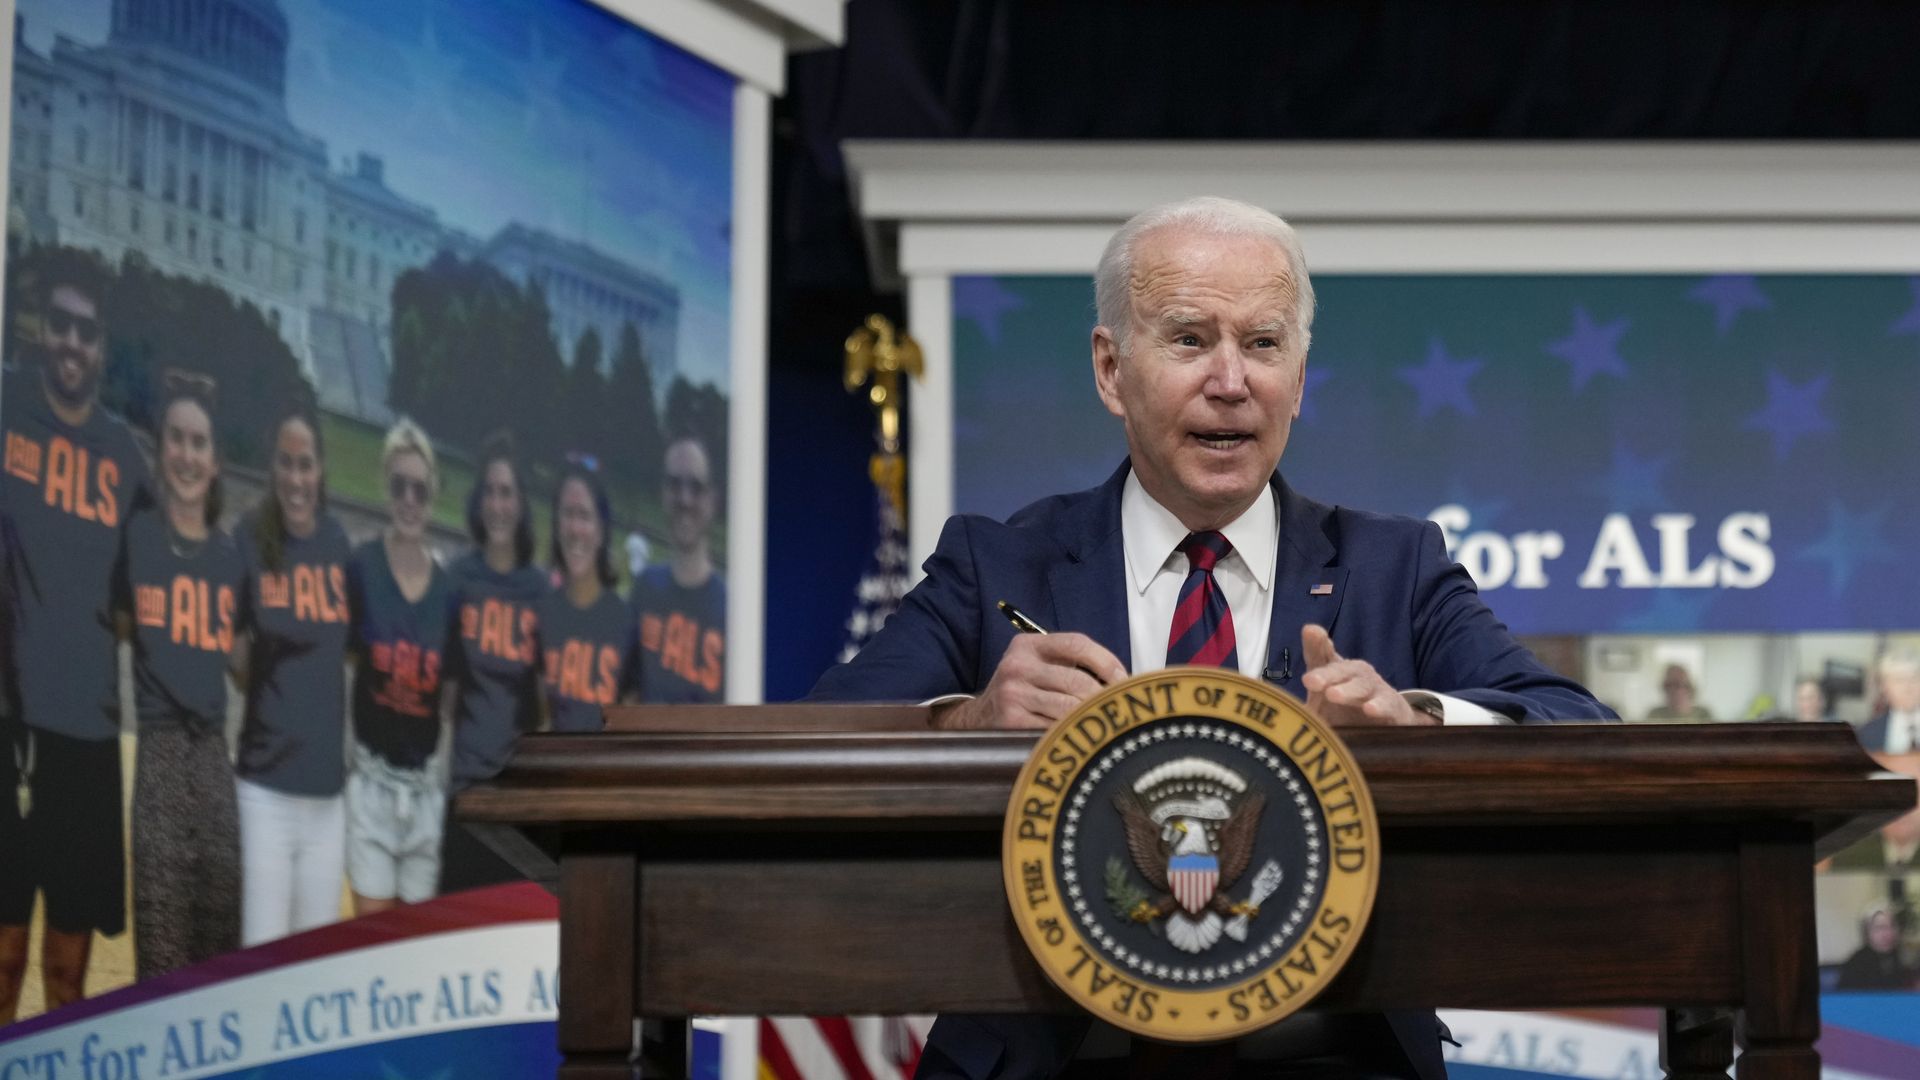 President Joe Biden signs H.R. 3537, the Accelerating Access to Critical Therapies for ALS Act in the South Court Auditorium of the White House complex December 23, 2021 in Washington, DC. 